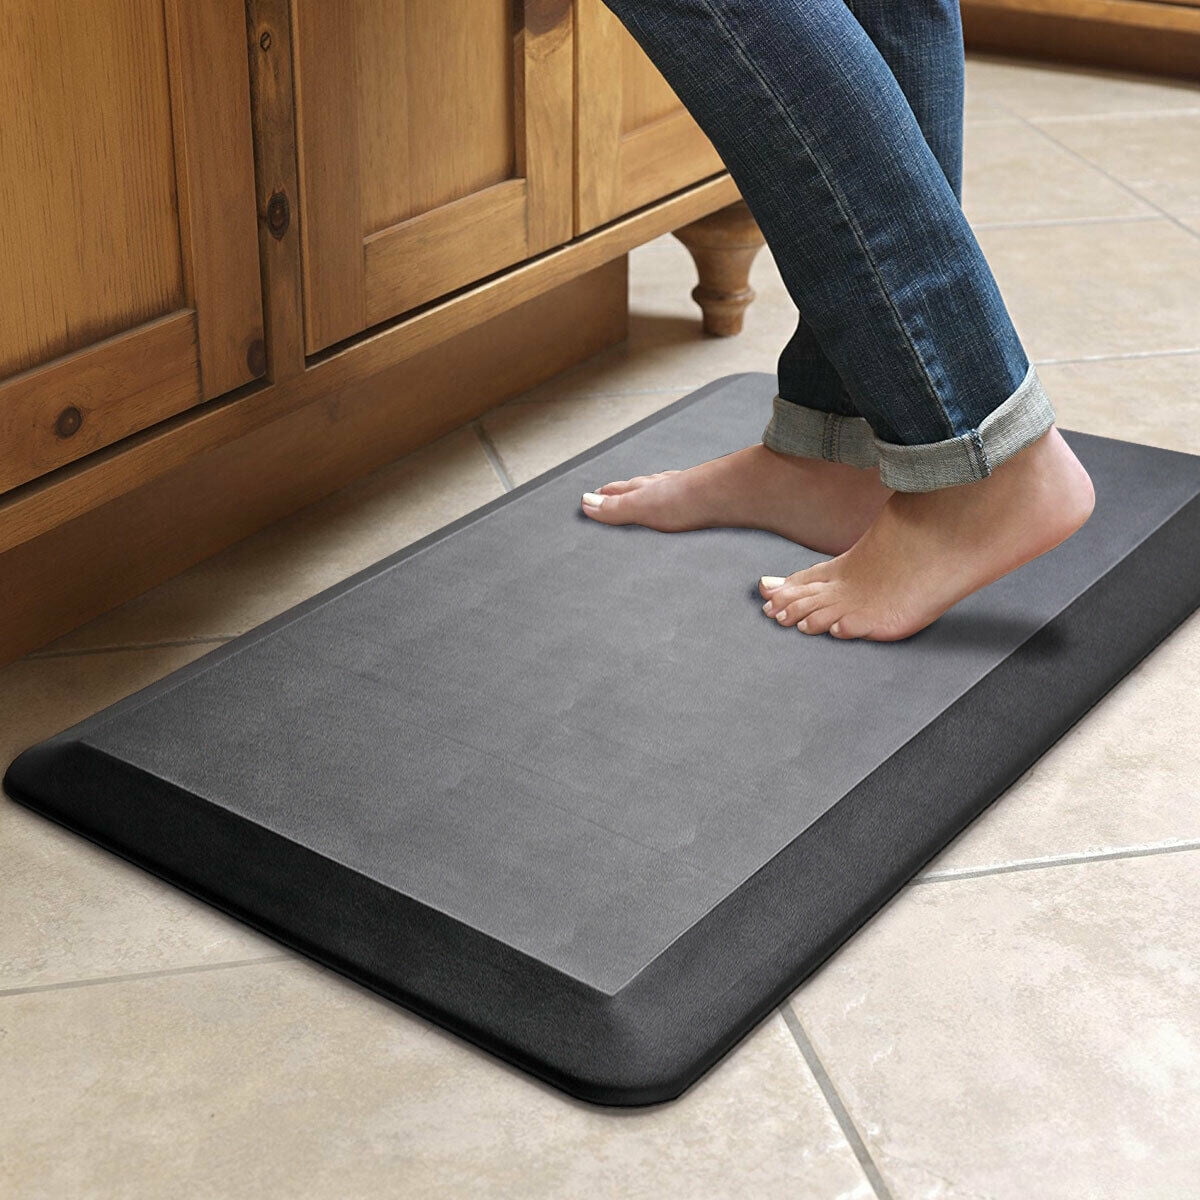 Zulay Home Large 20 x 32 Inch Anti Fatigue Floor Mat - 3/4 Inch Thick  Cushioned Kitchen Mats for Standing - Comfortable Padded Floor Mats for Standing  Work Desk - Memory Foam